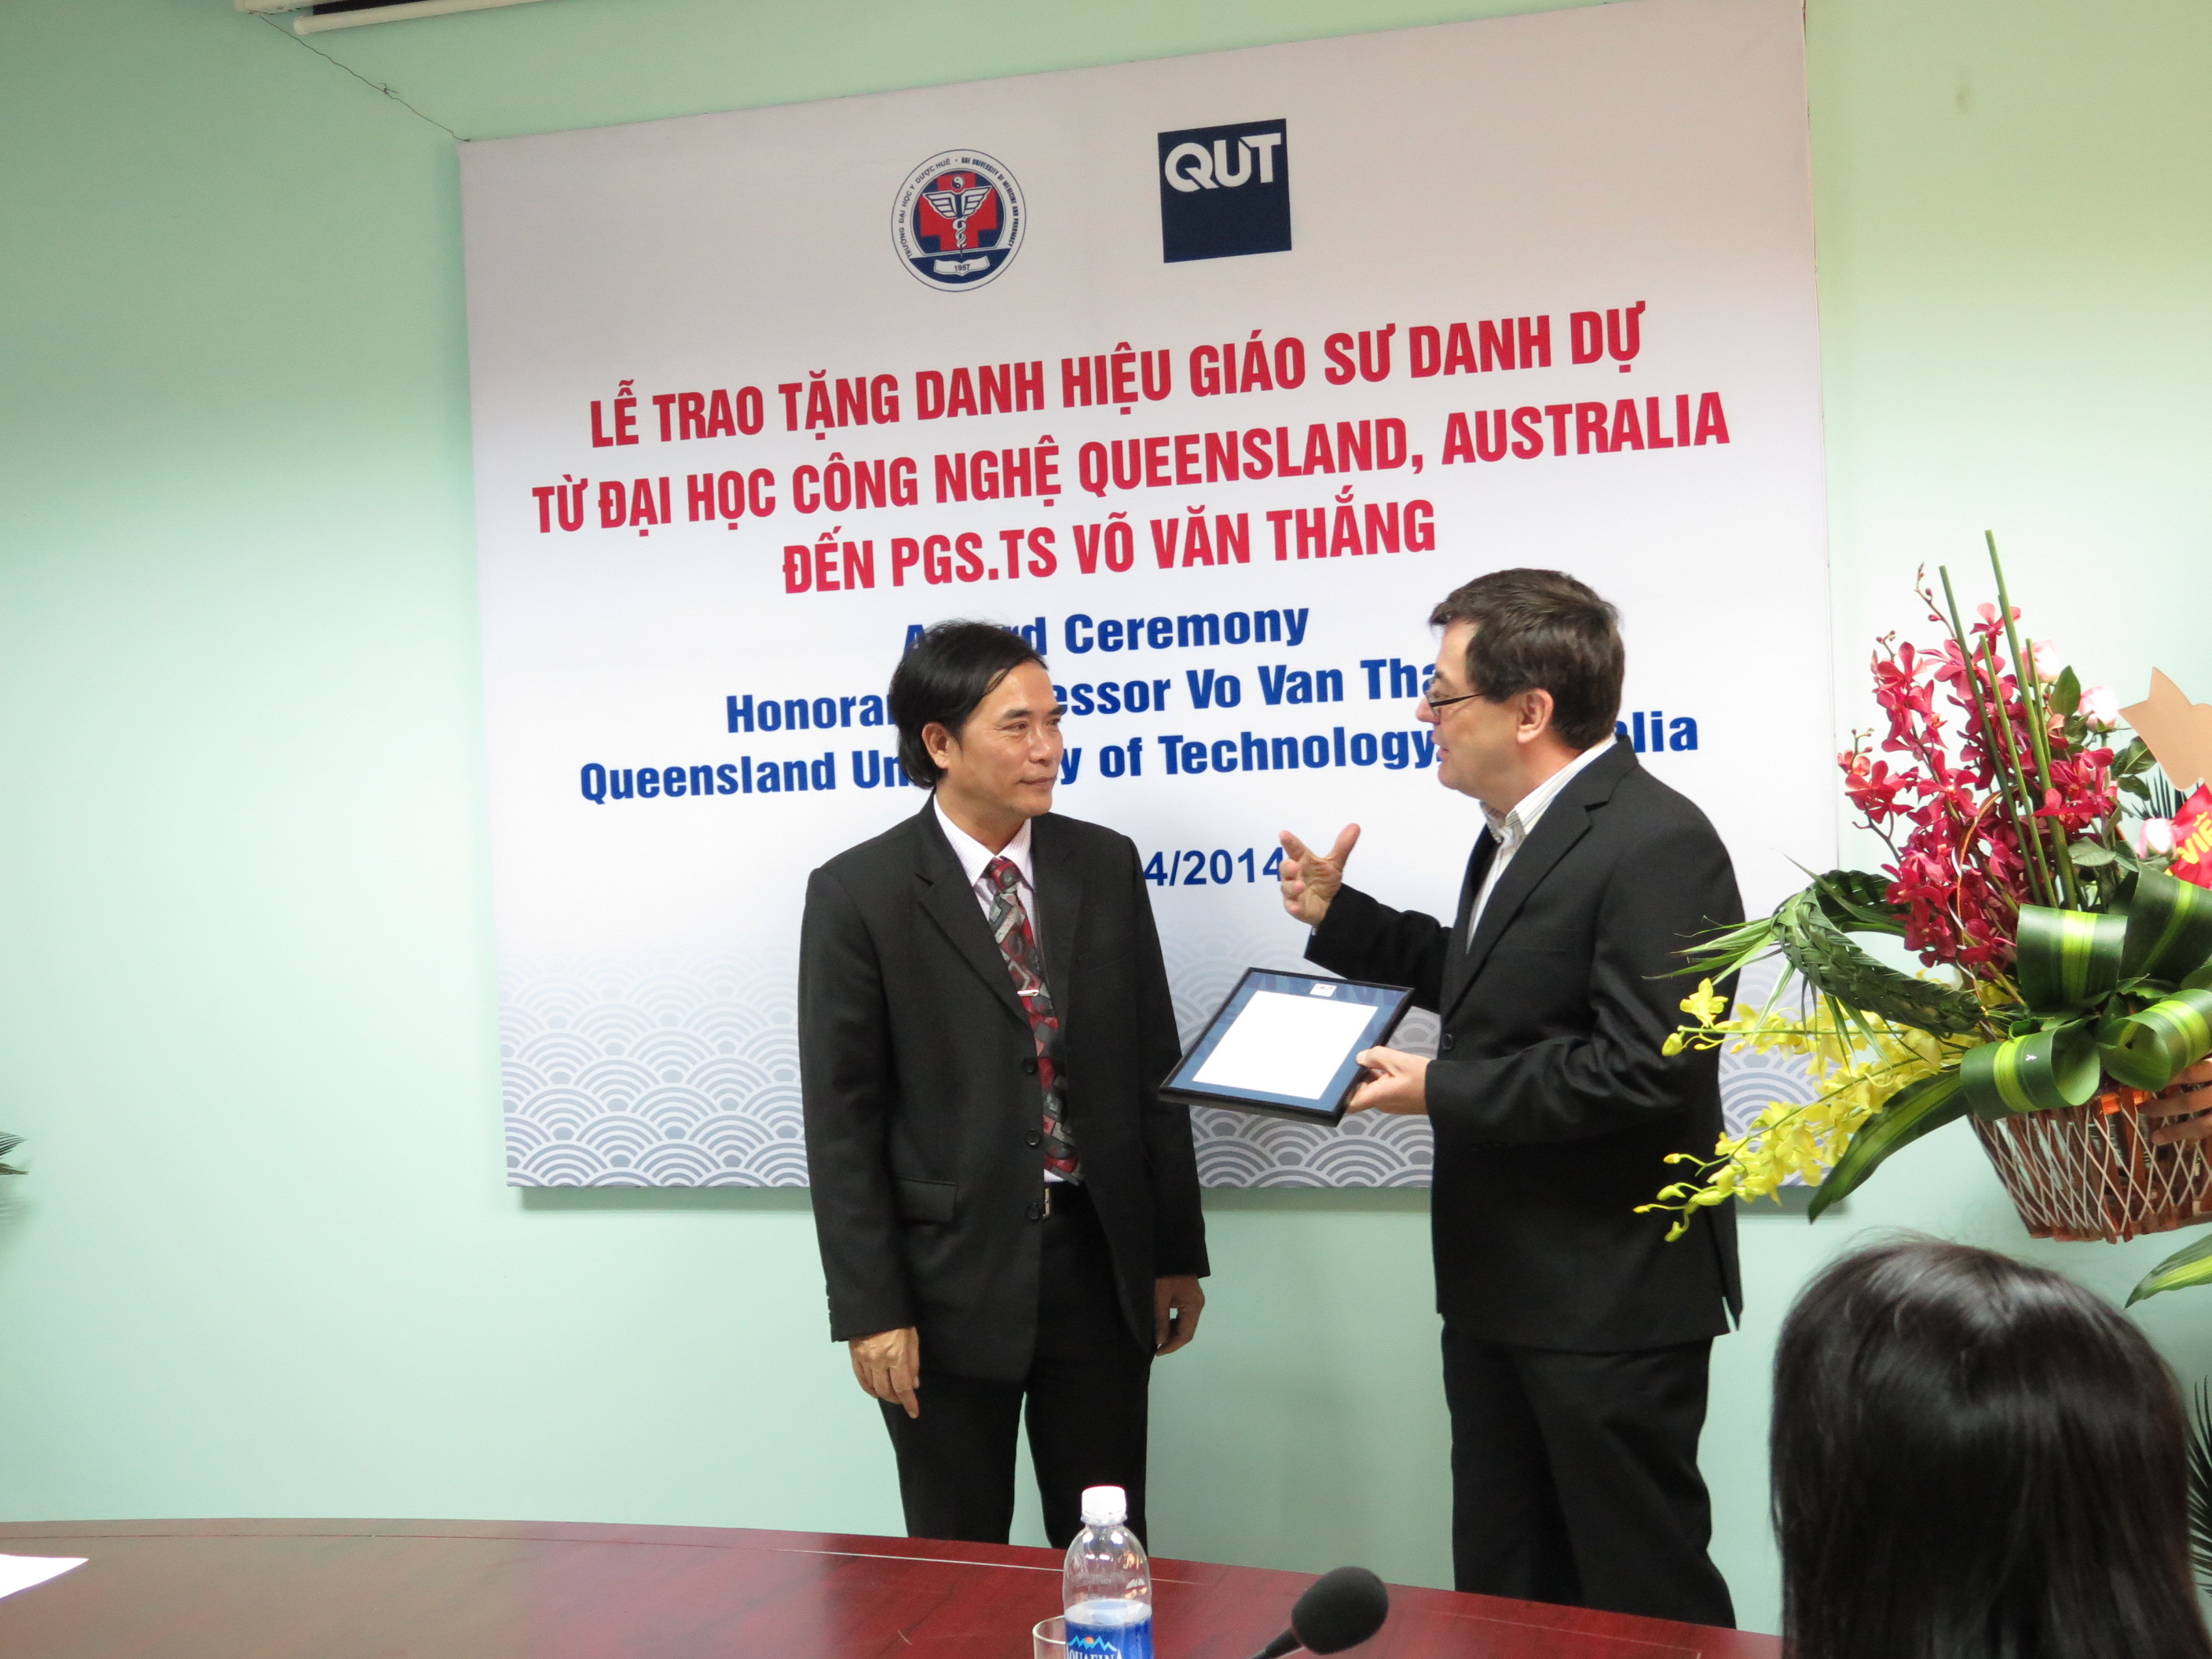 The Honorary Professor title was conferred on Assoc.Prof. Vo Van Thang by Queensland University of Technology, Australia